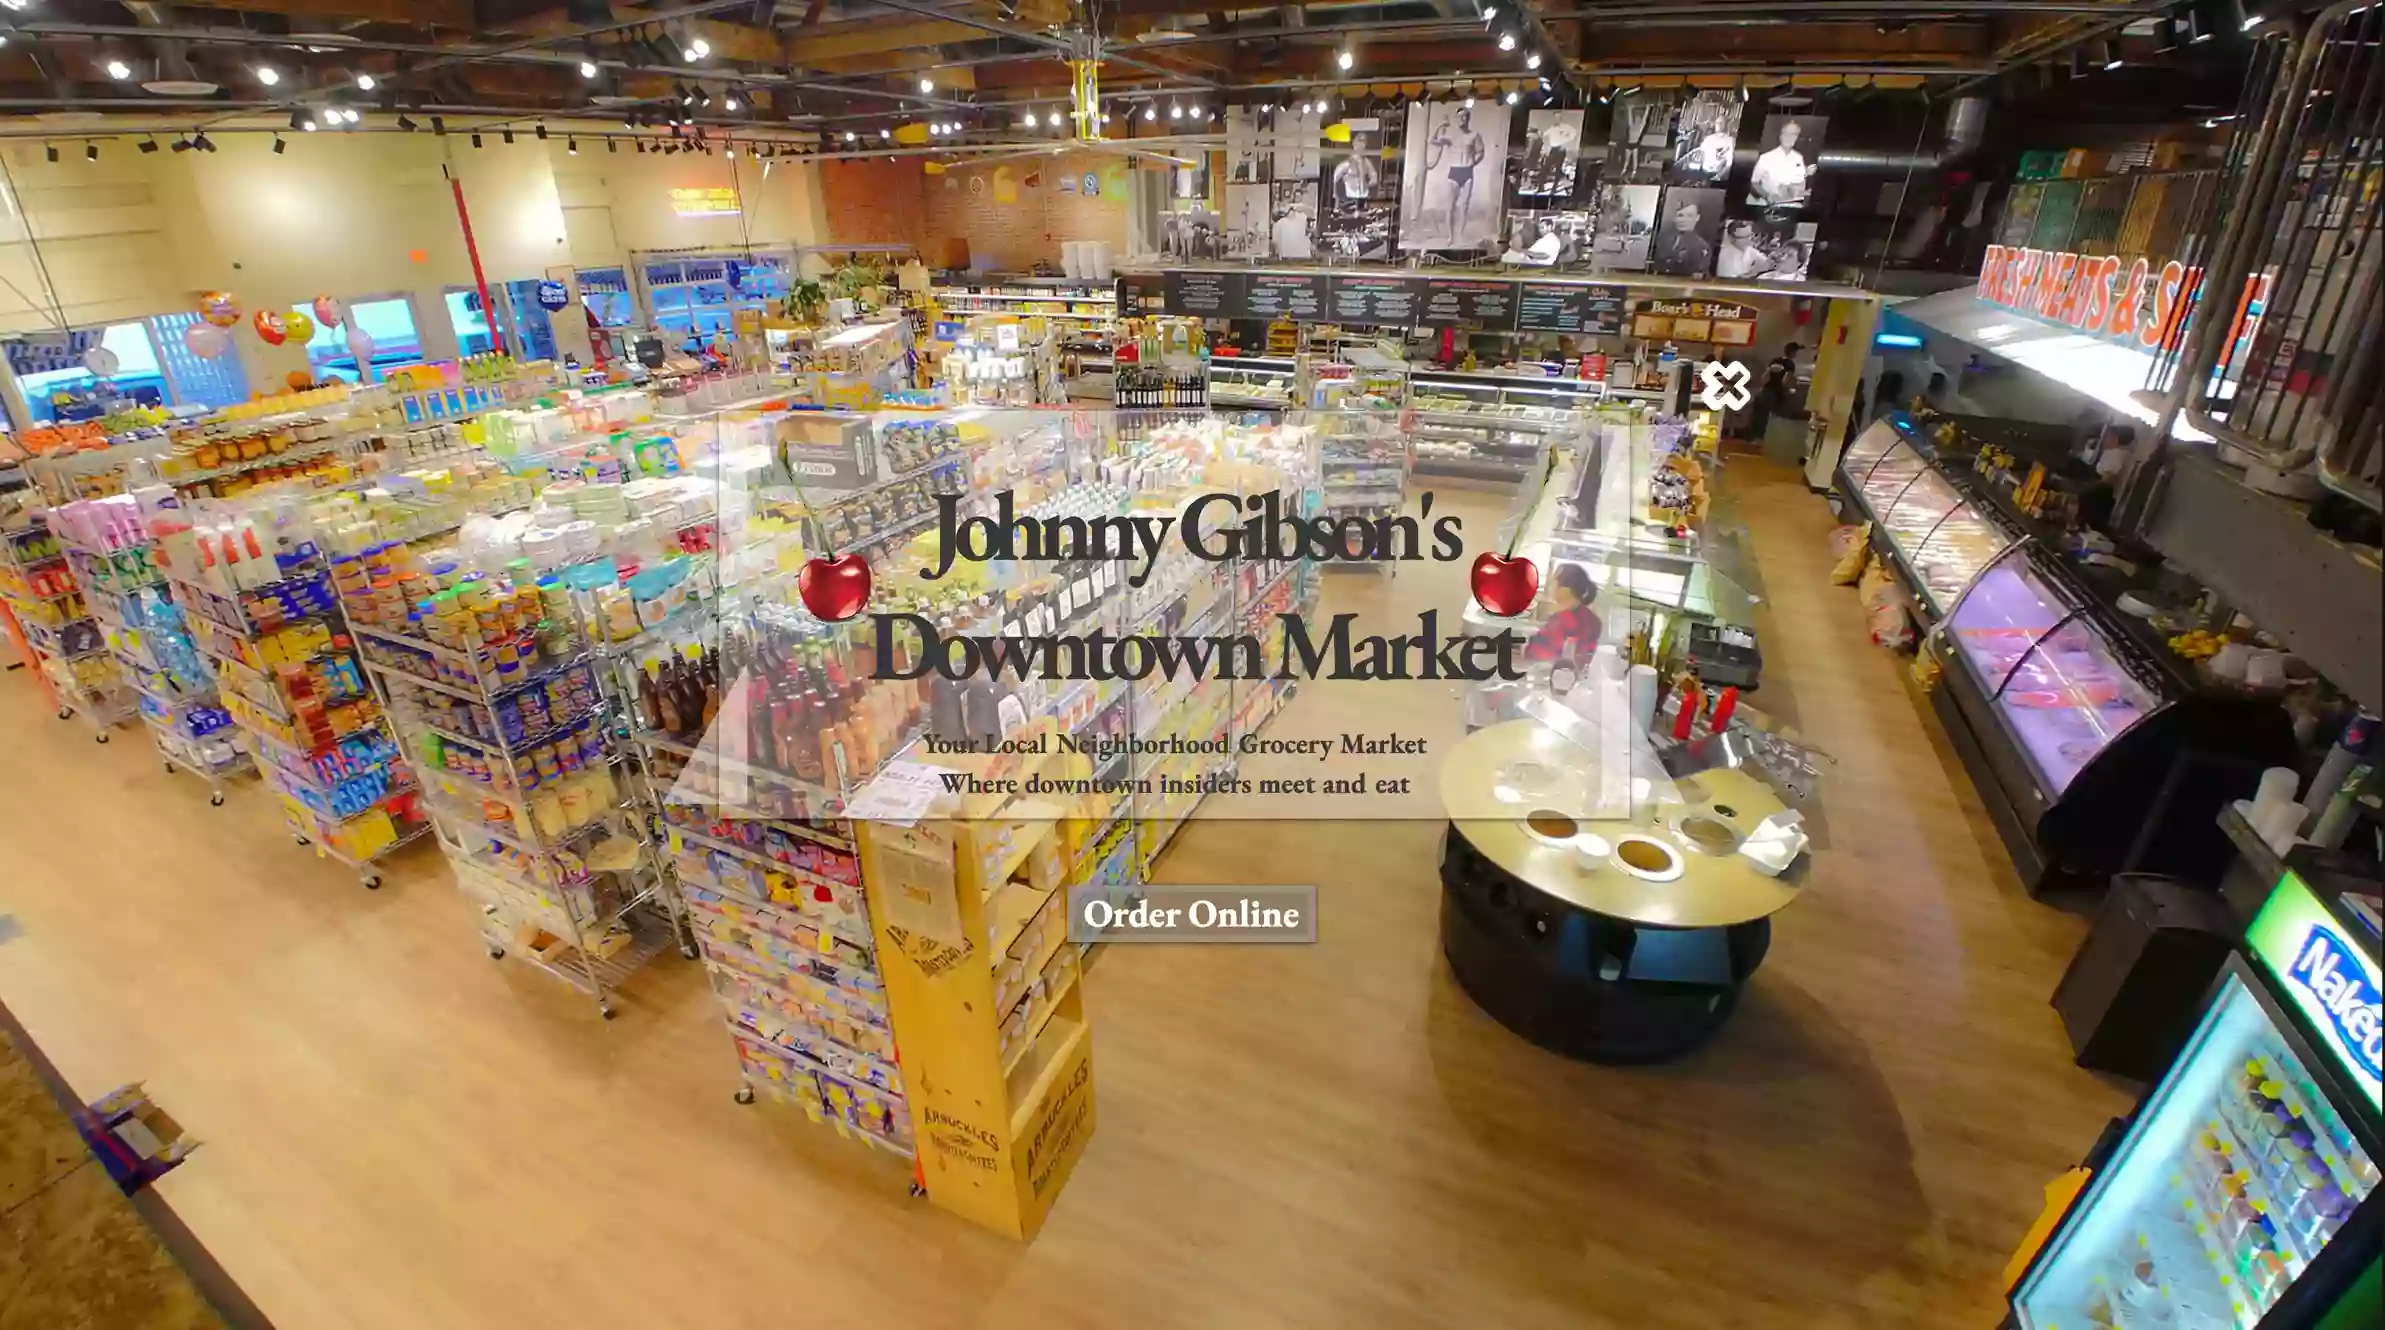 Johnny Gibson's Downtown Market